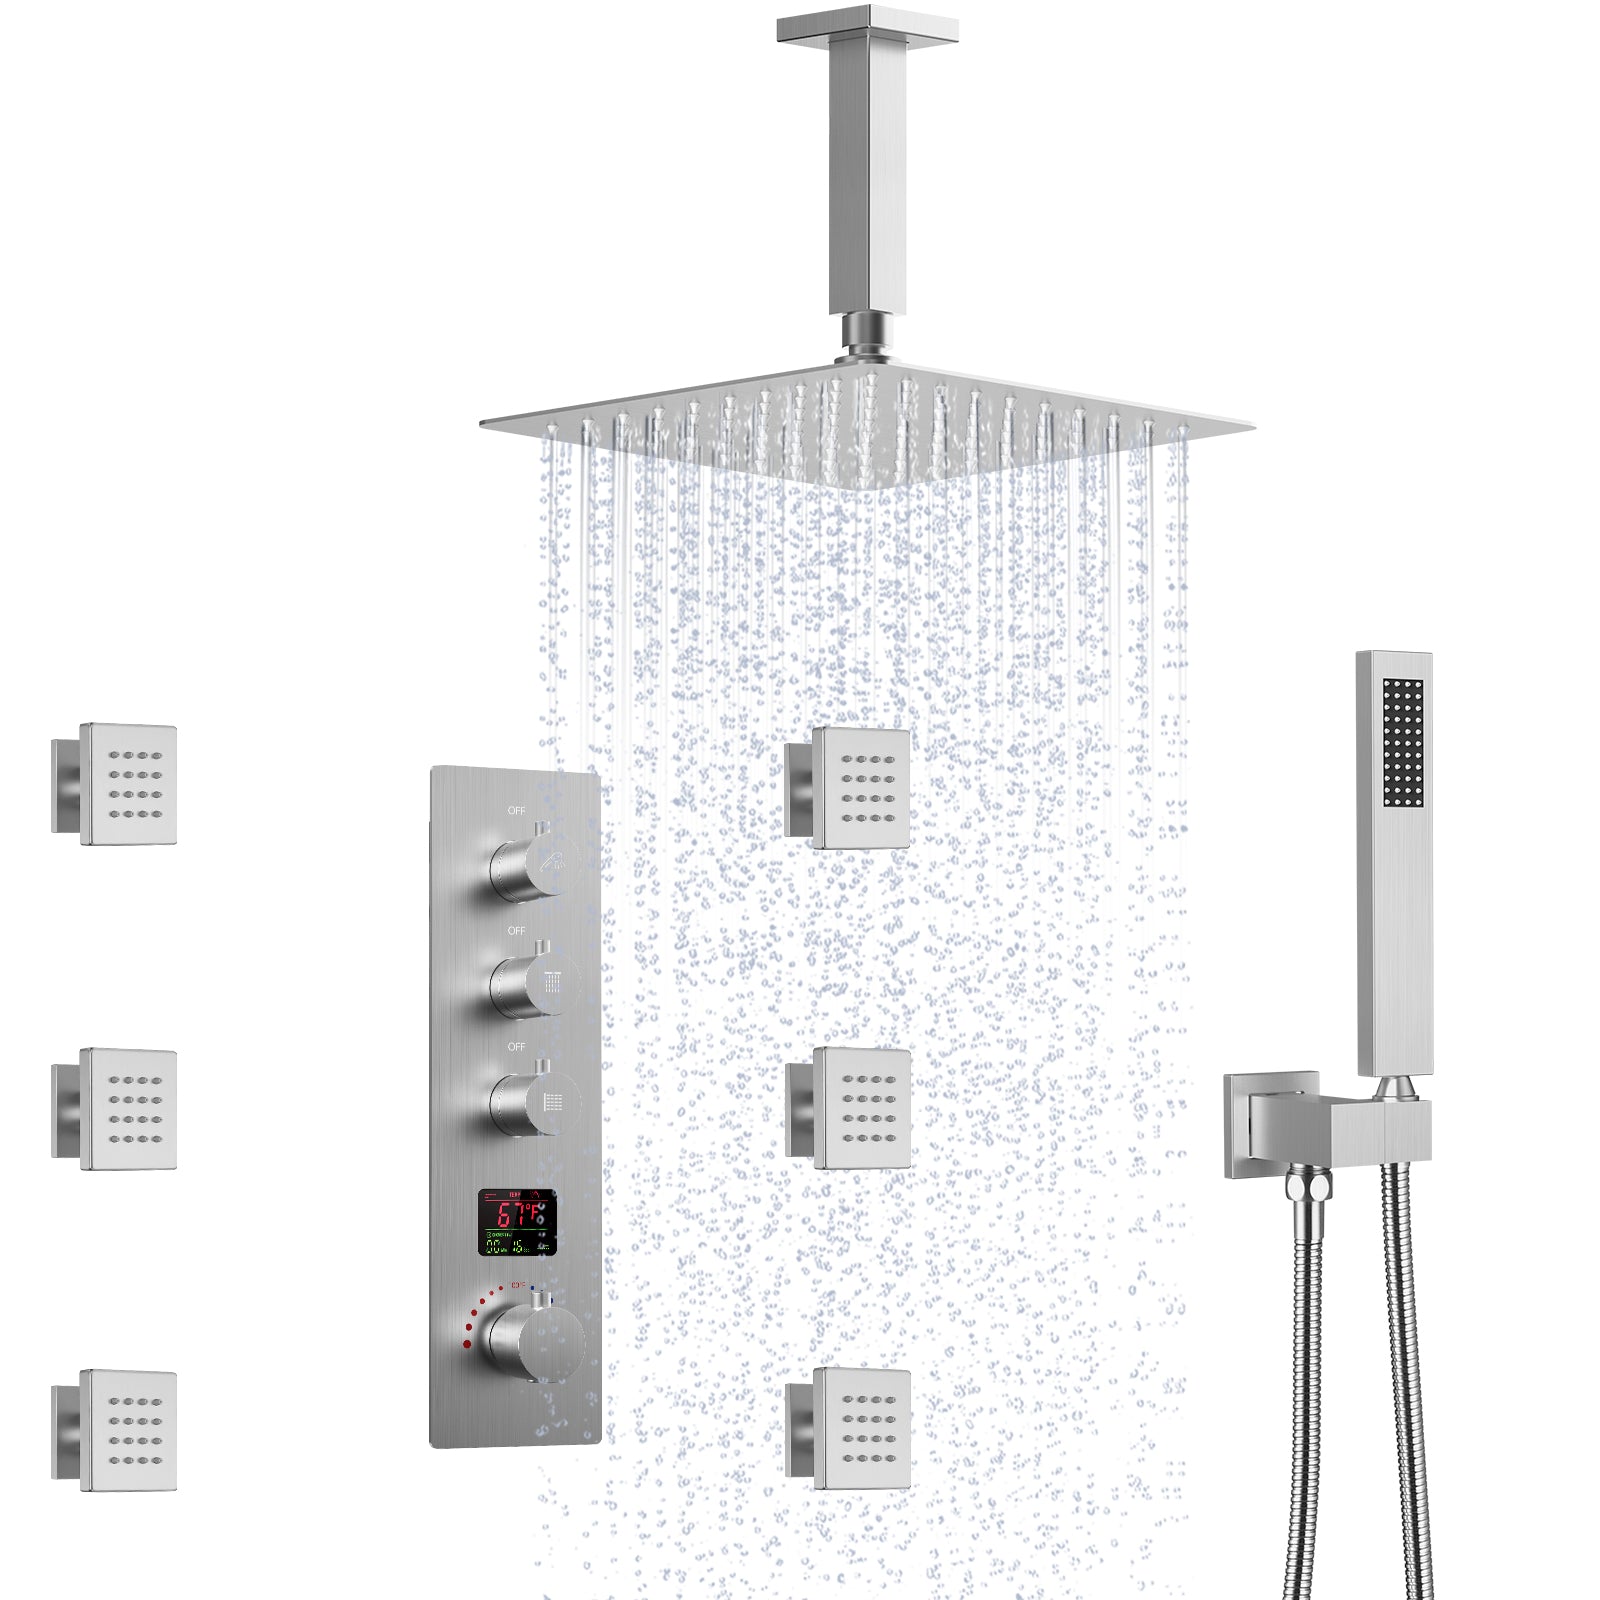 SFS-1026-NK12 EVERSTEIN LED Thermostatic Dual Function Shower Head System Ceiling Mounted with Rough-in Valve in Brushed Nickel